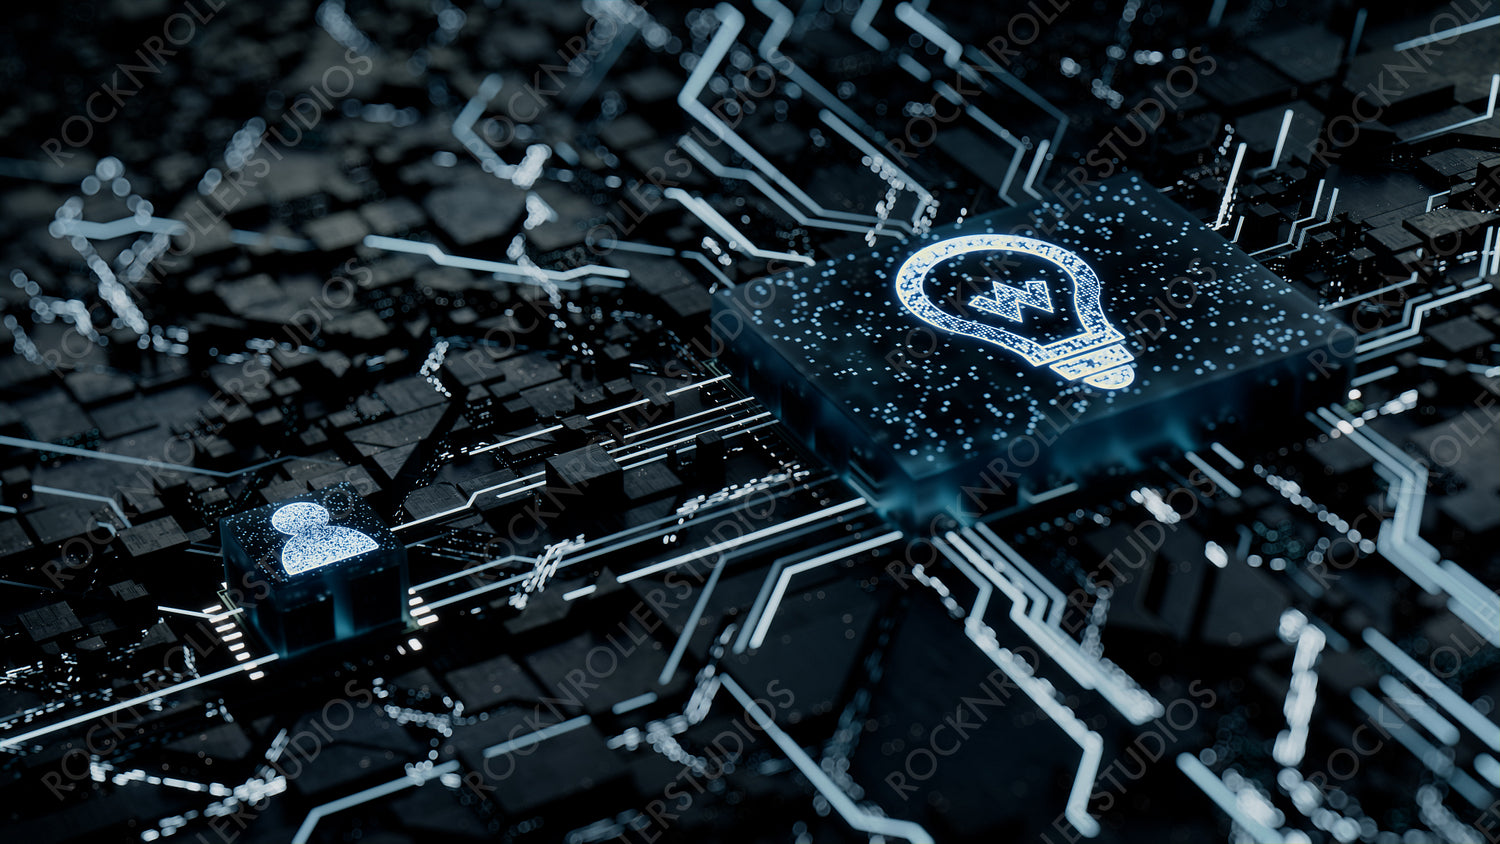 Innovation Technology Concept with lightbulb symbol on a Microchip. White Neon Data flows between the CPU and the User across a Futuristic Motherboard. 3D render.